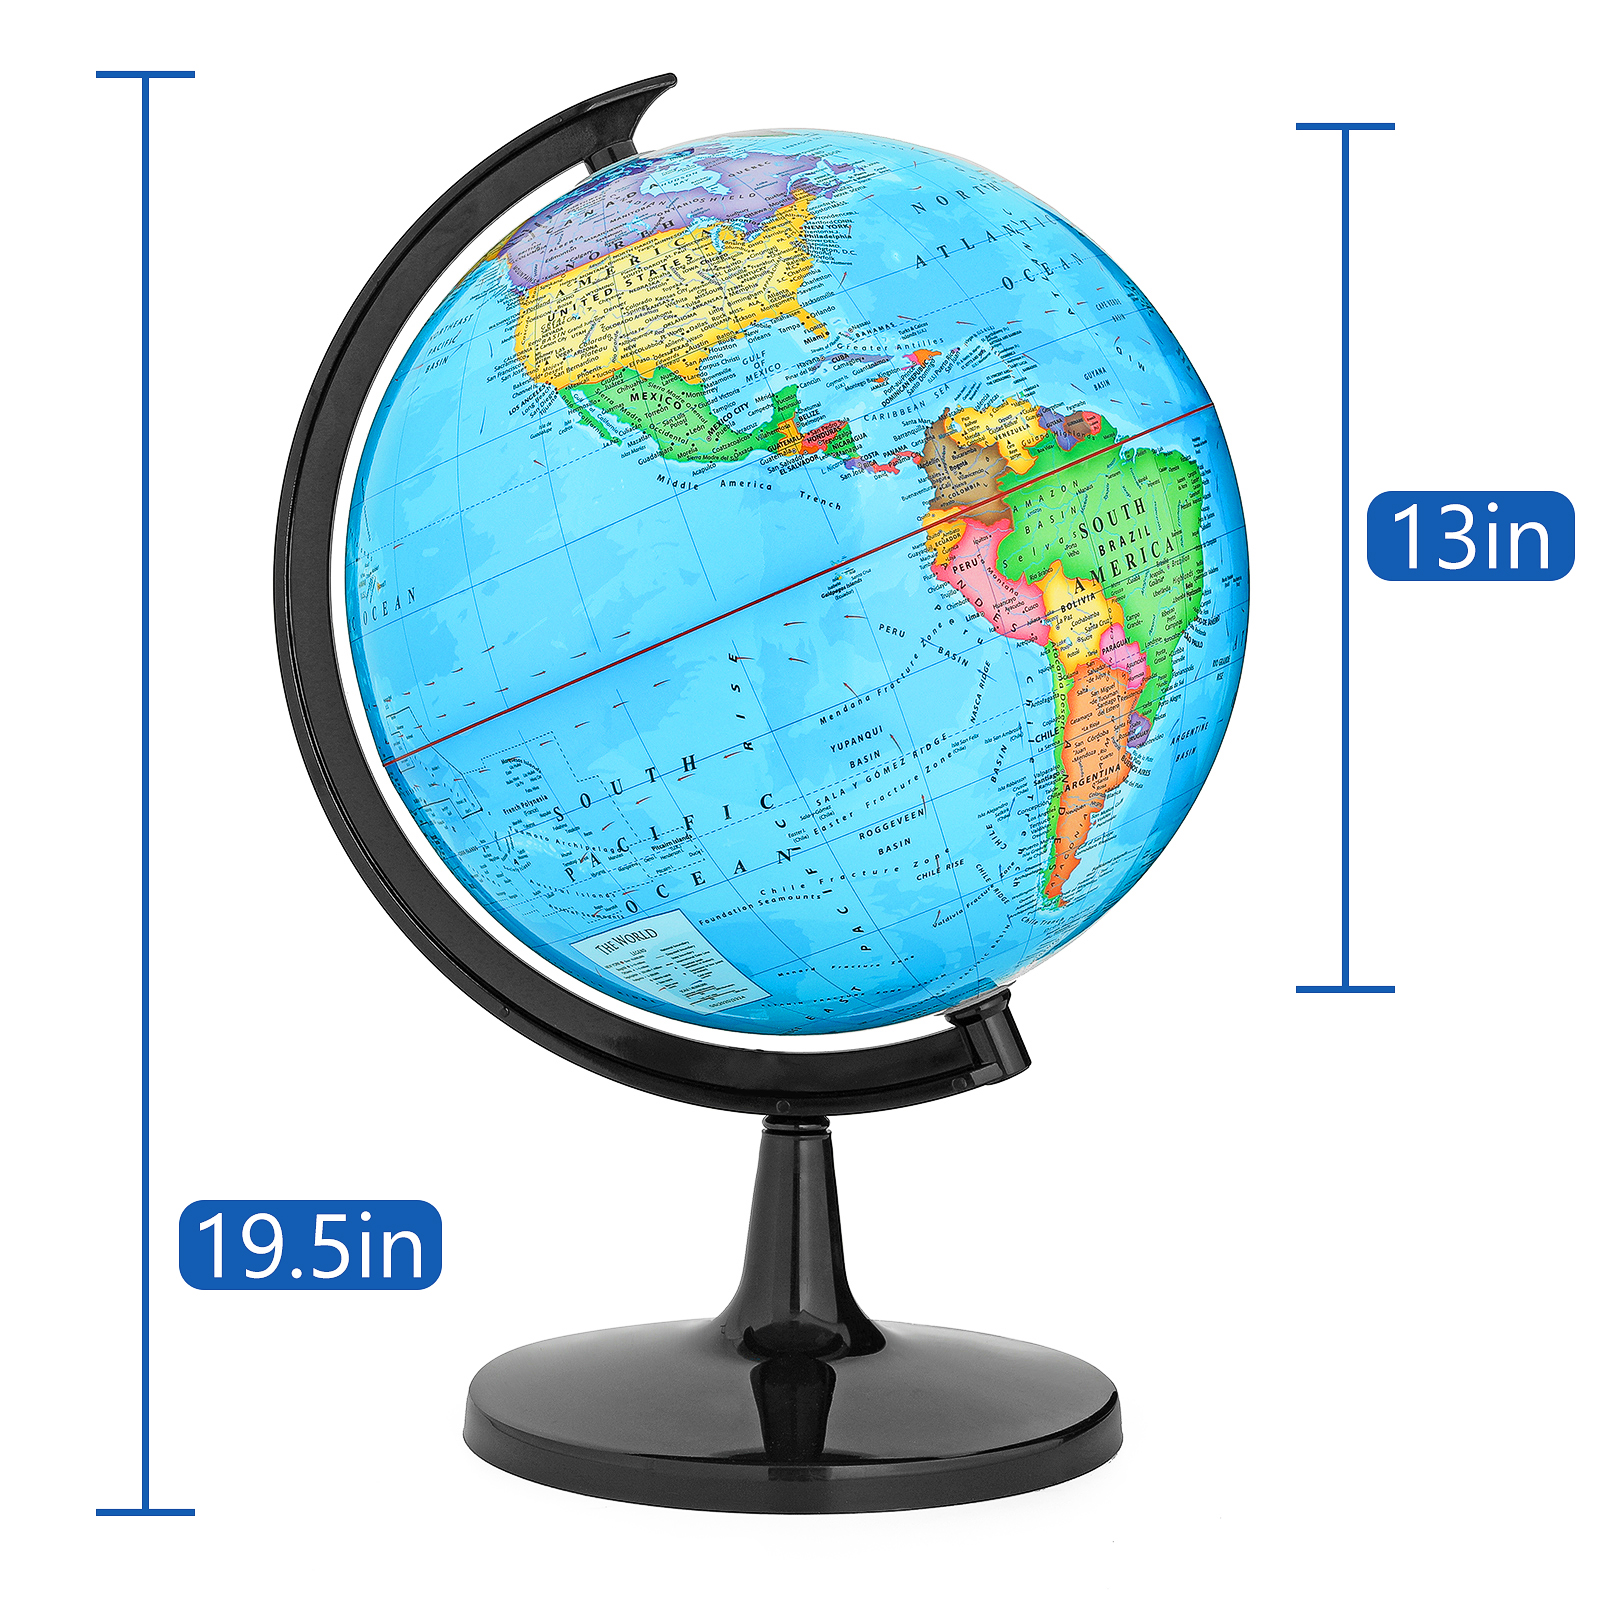 BSHAPPLUS 13" World Globe for Kids, Rotating Globes of the World with Stand, Geography Educational Toy, Home Office, Shelf Desktop, Decor Gift - image 3 of 7